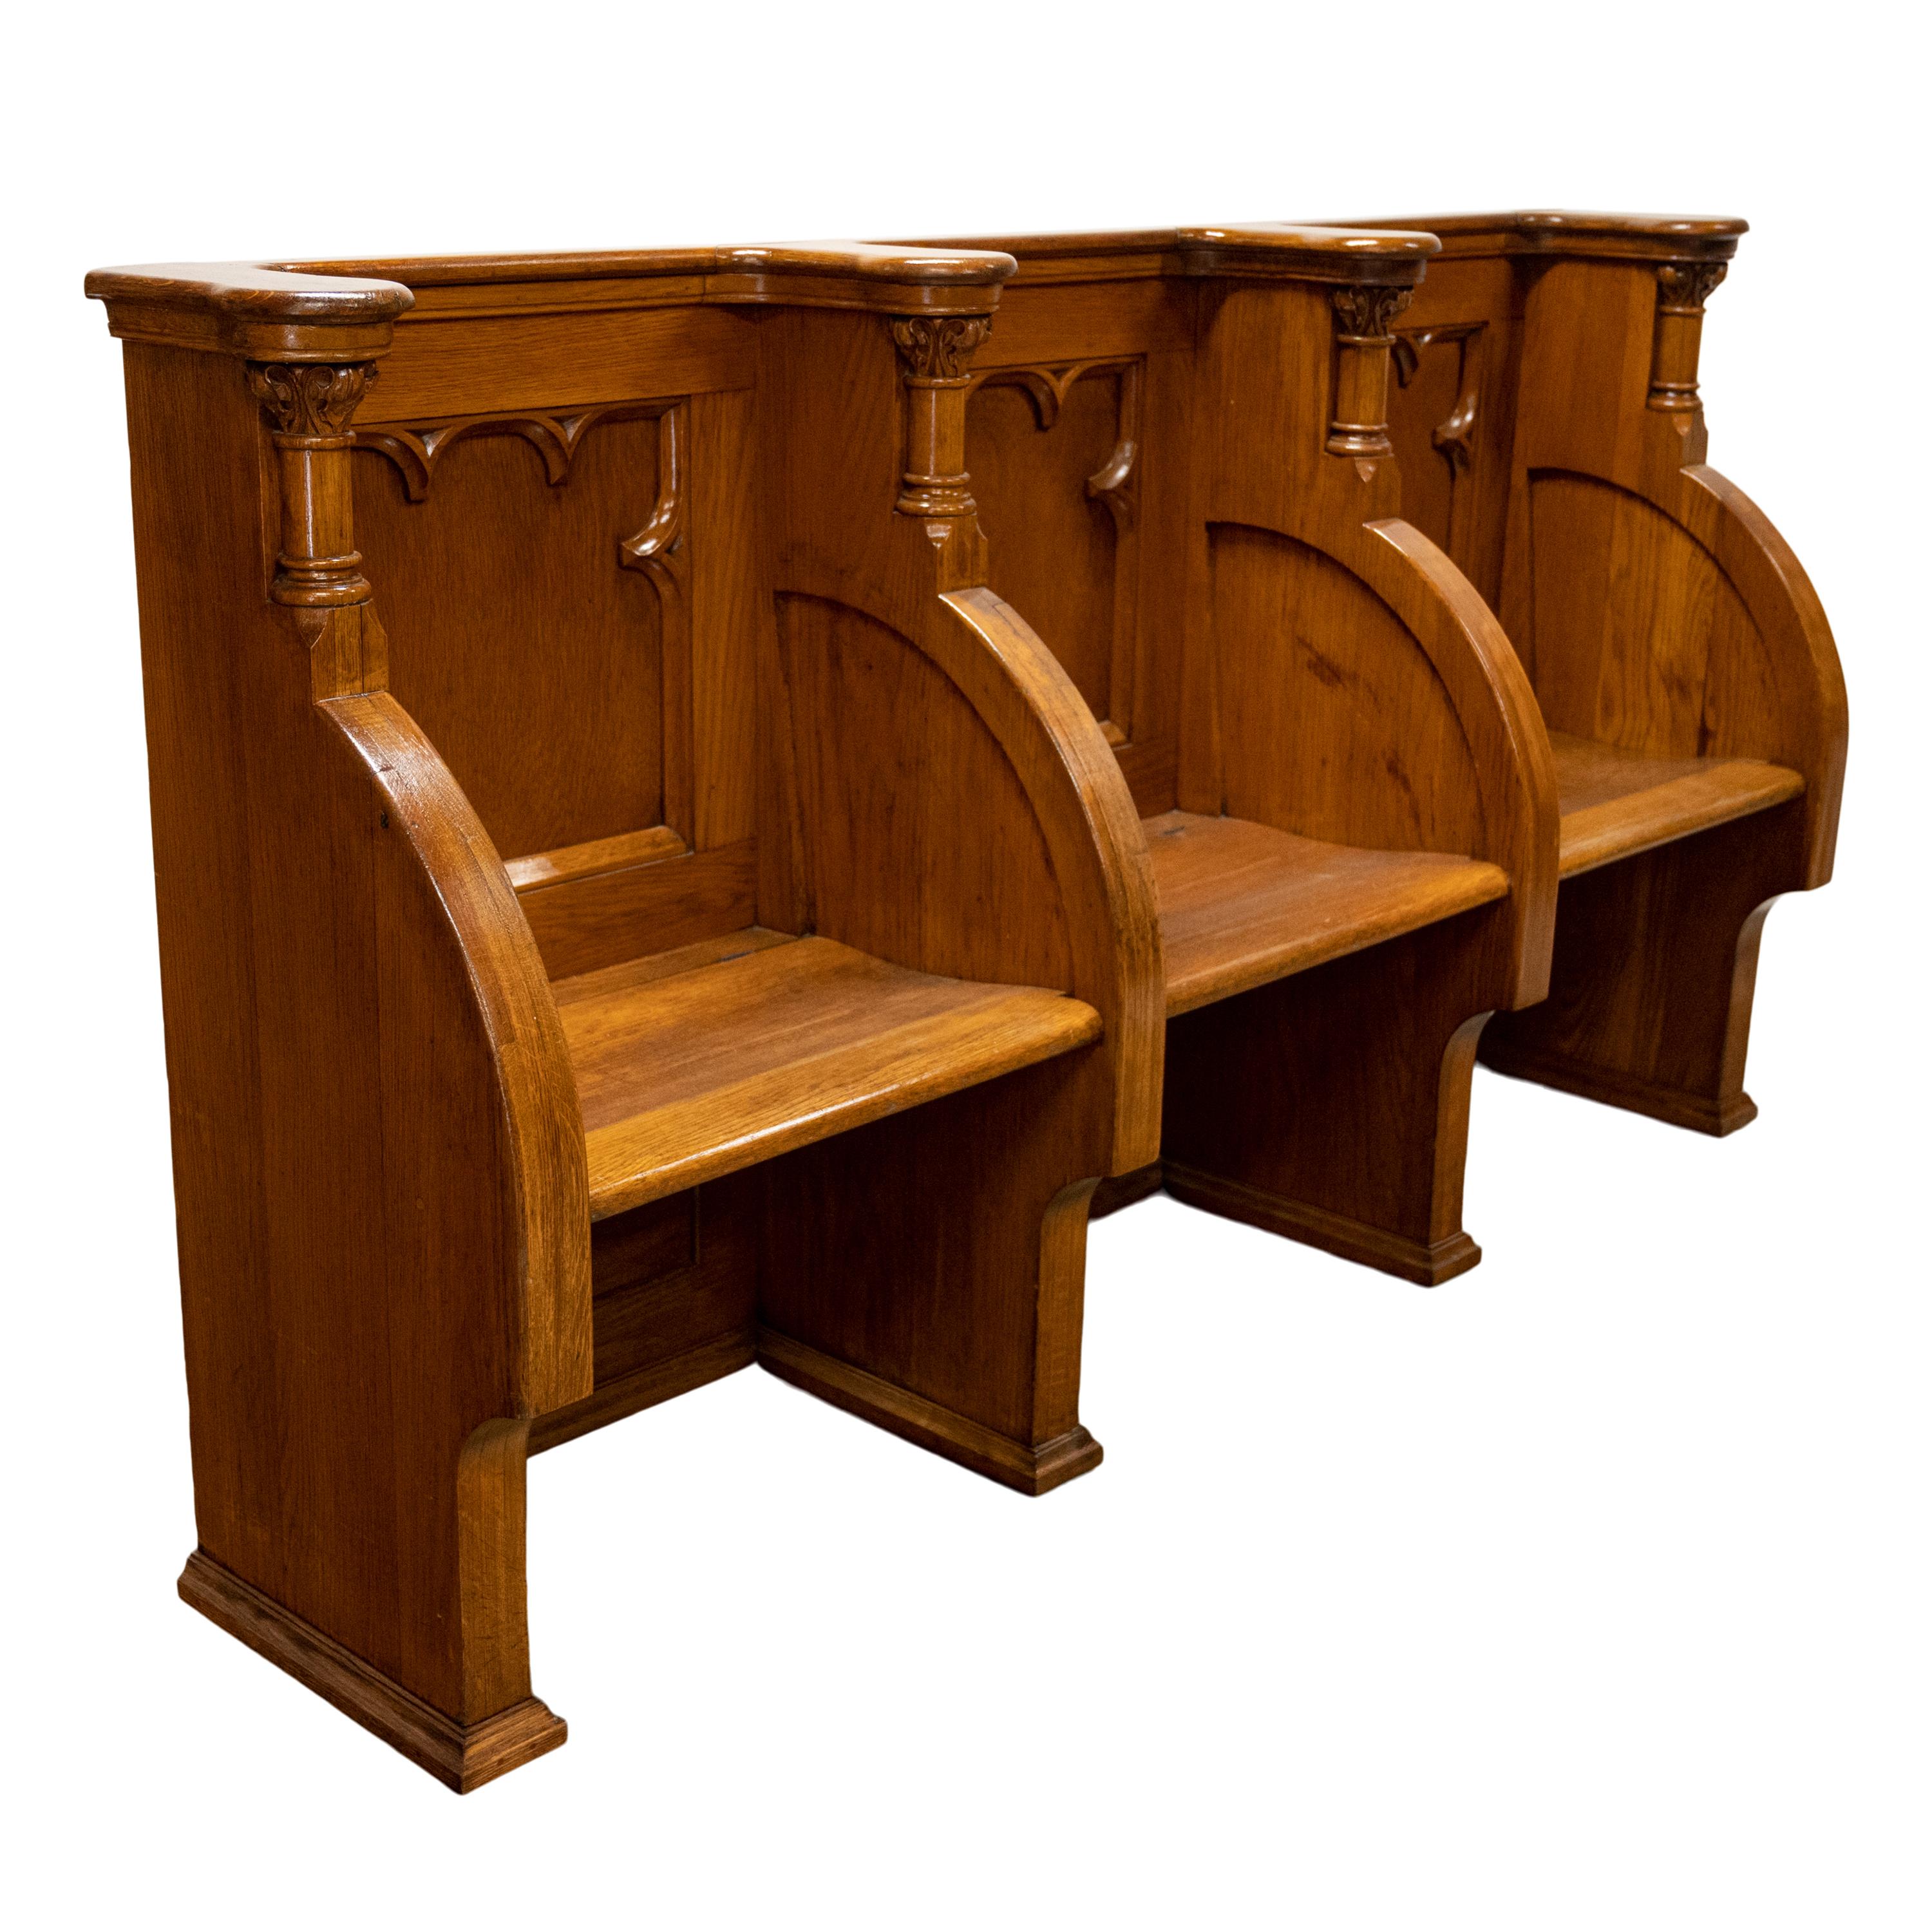 Mid-19th Century Antique Gothic Revival Pugin Carved Oak Church 3 Seat Pew Bench Choir Stall 1850